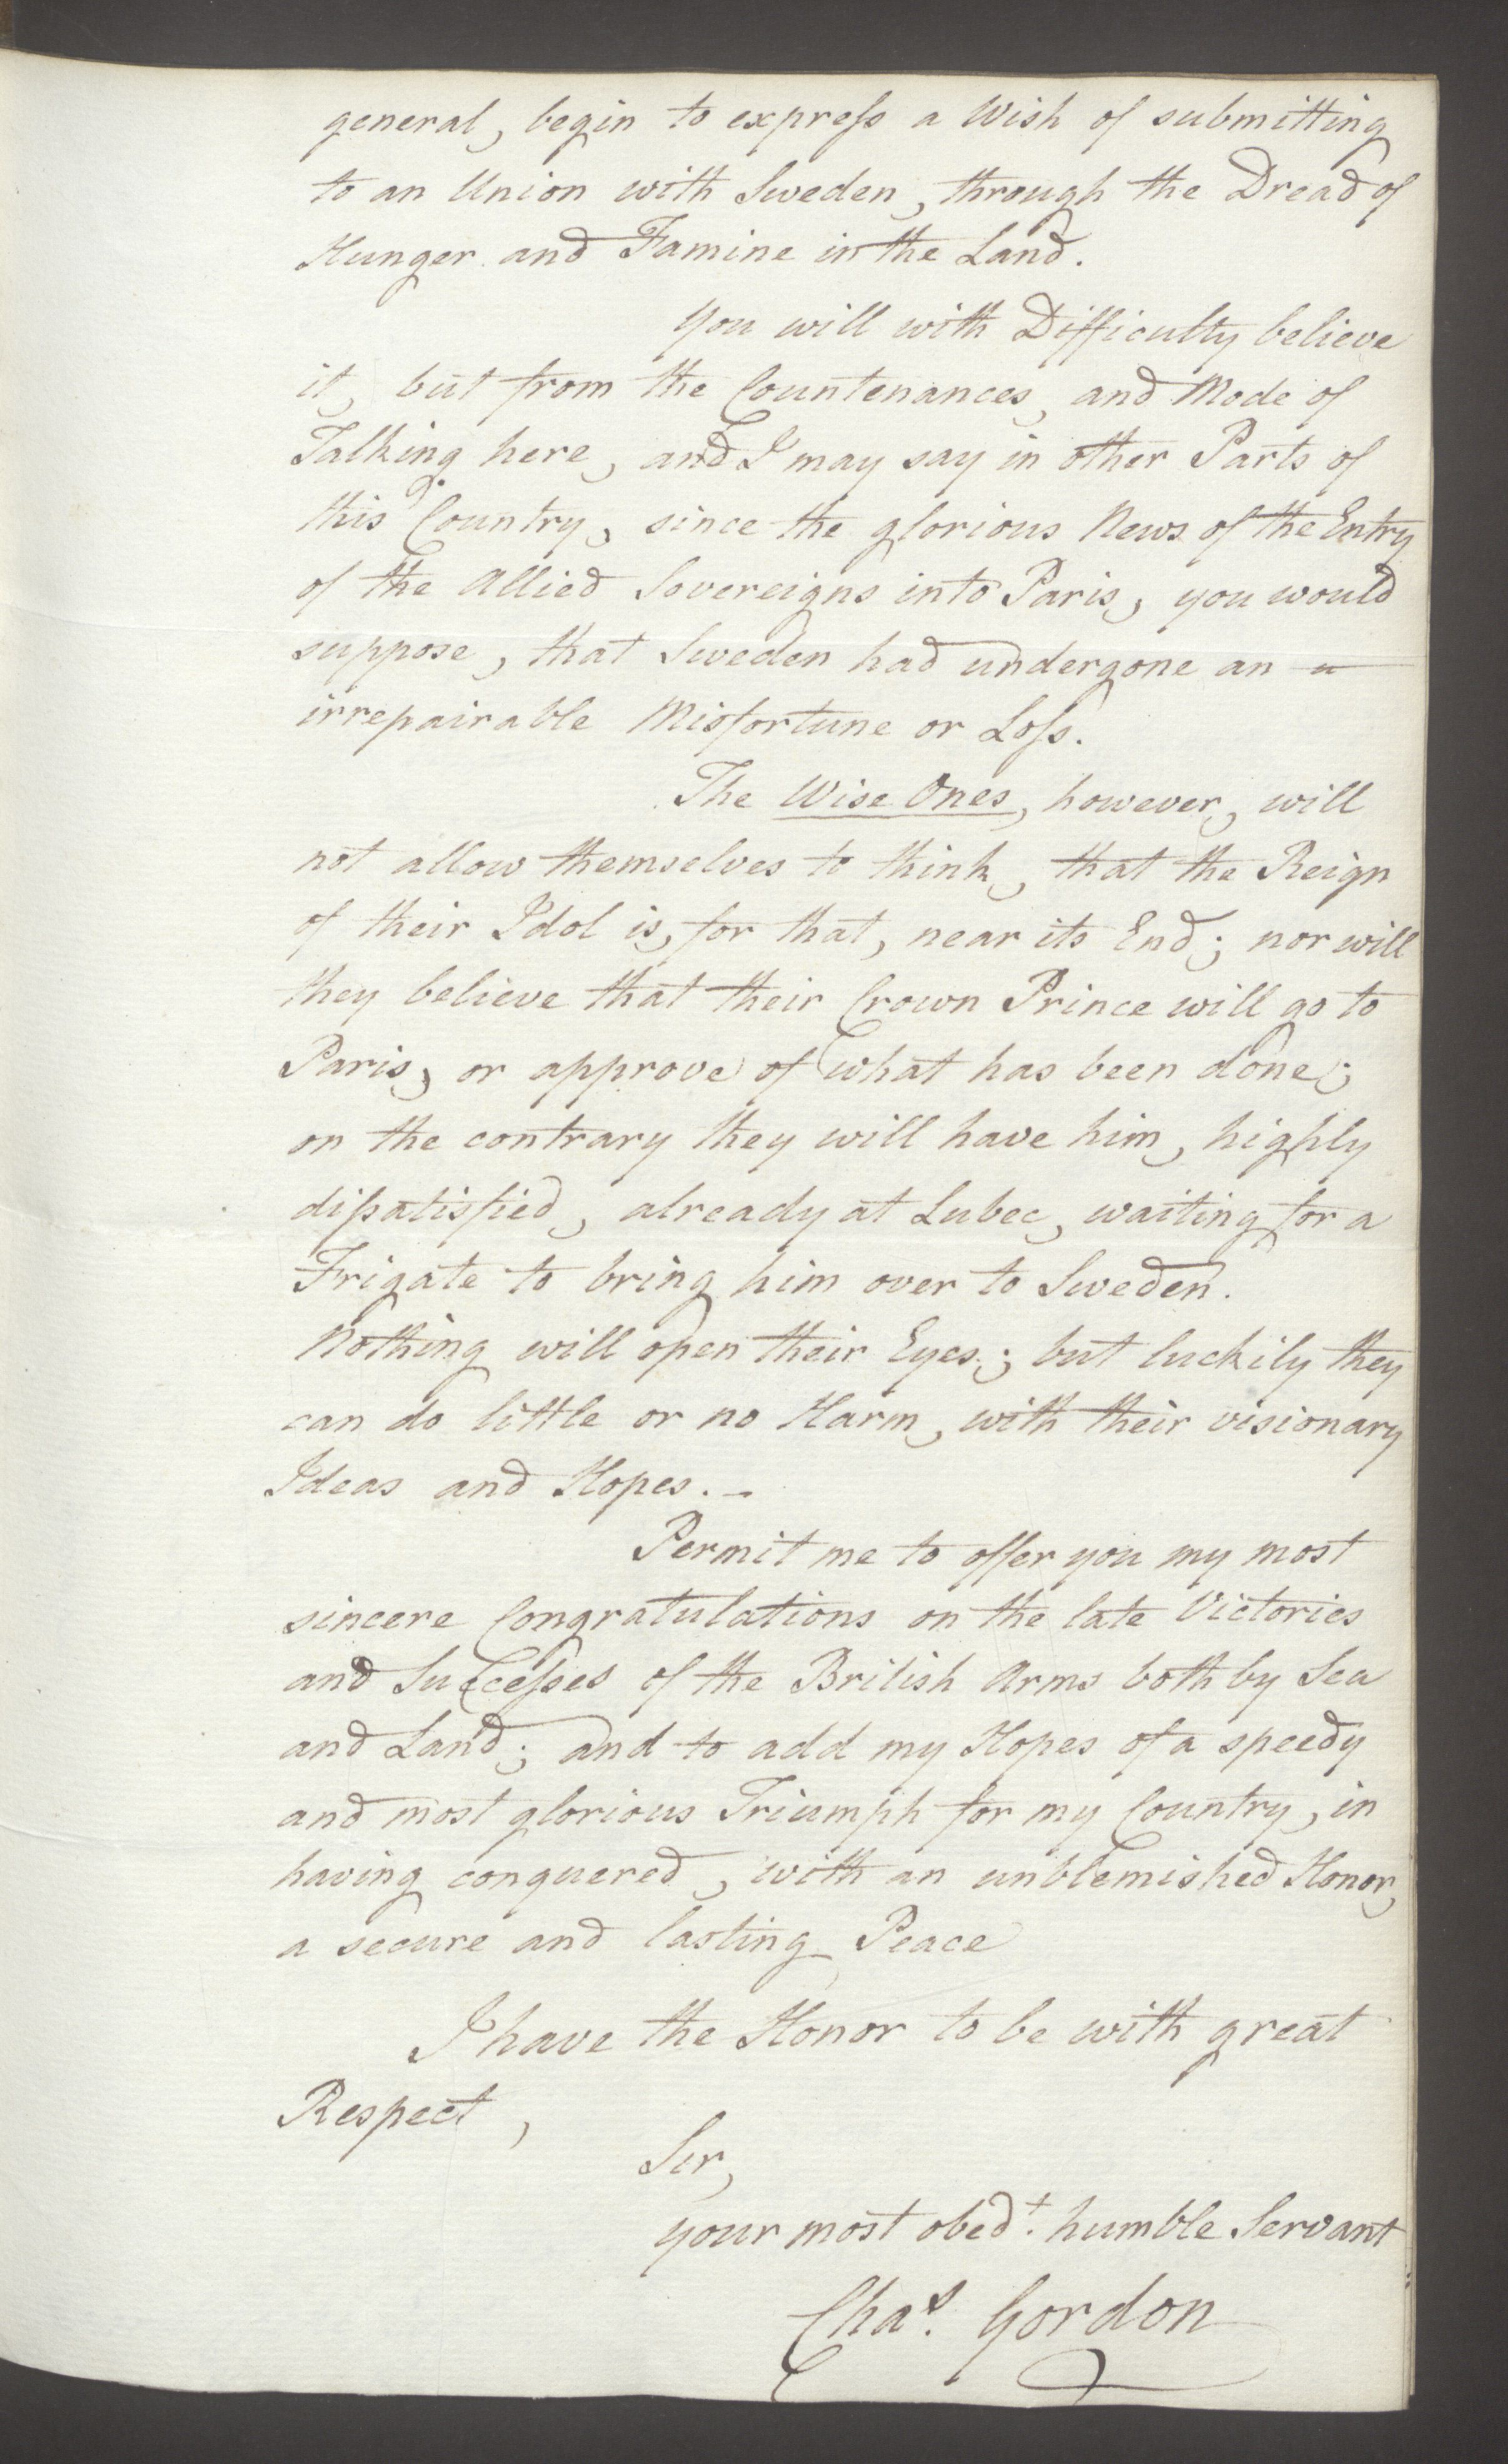 Foreign Office*, UKA/-/FO 38/16: Sir C. Gordon. Reports from Malmö, Jonkoping, and Helsingborg, 1814, s. 36